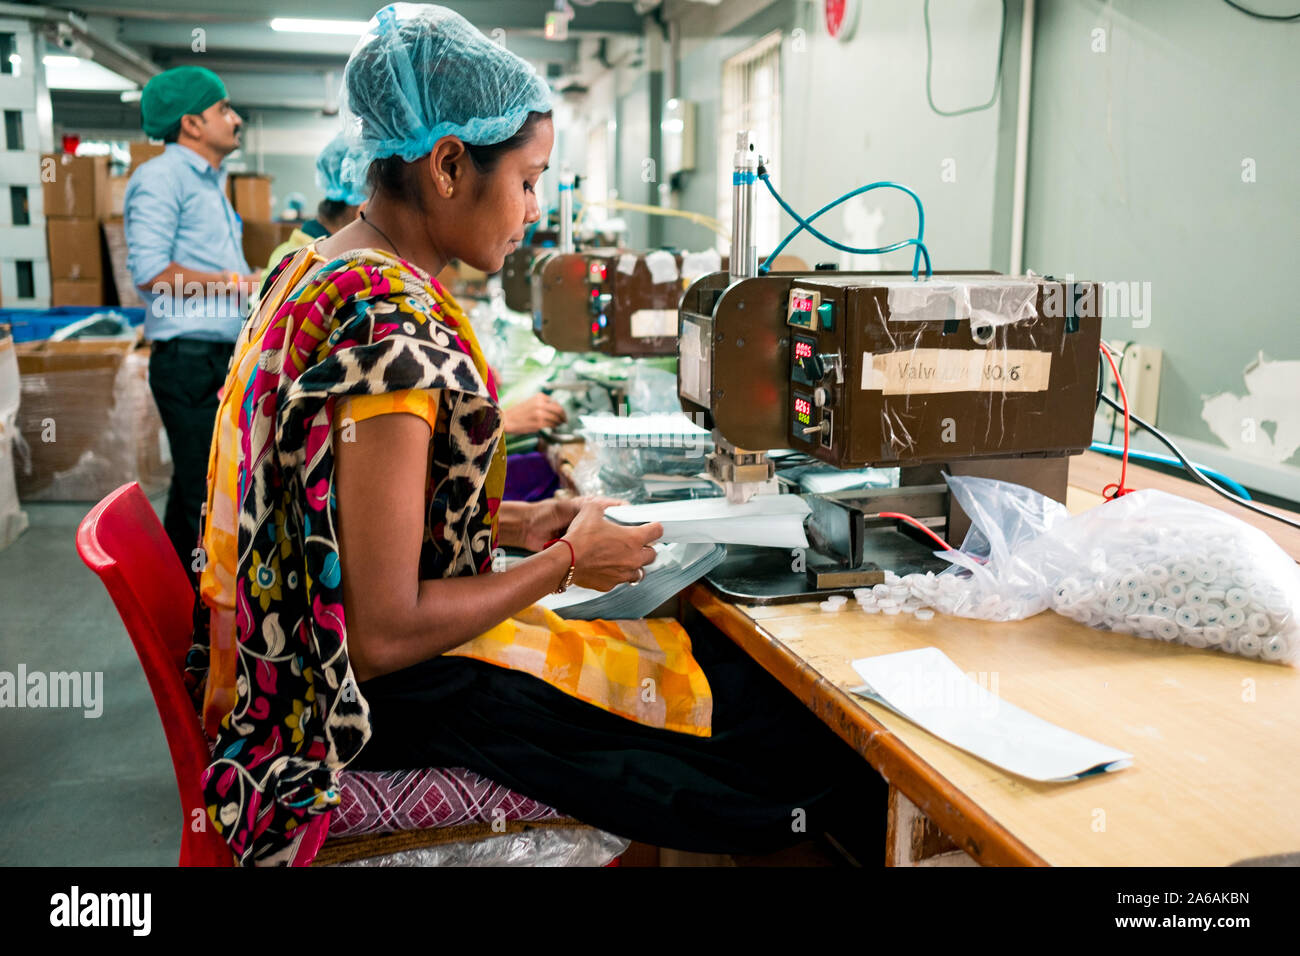 New delhi, India - 10 september 2019: an  indian woman at work using industrial equipment inside packaging manufacturing plant with serene expression Stock Photo